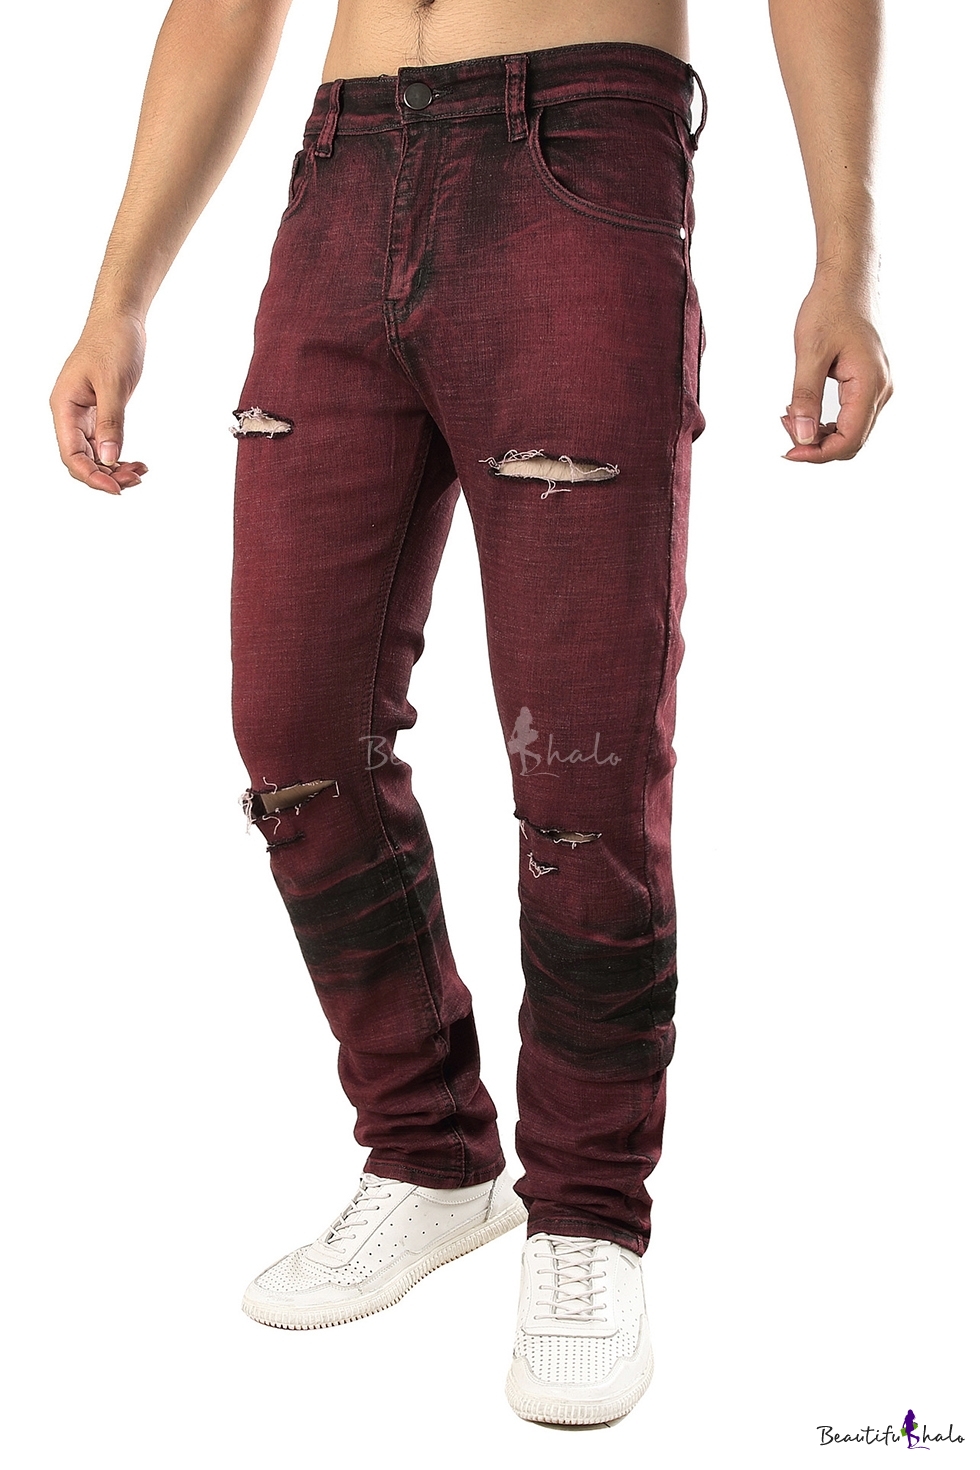 dark red ripped jeans